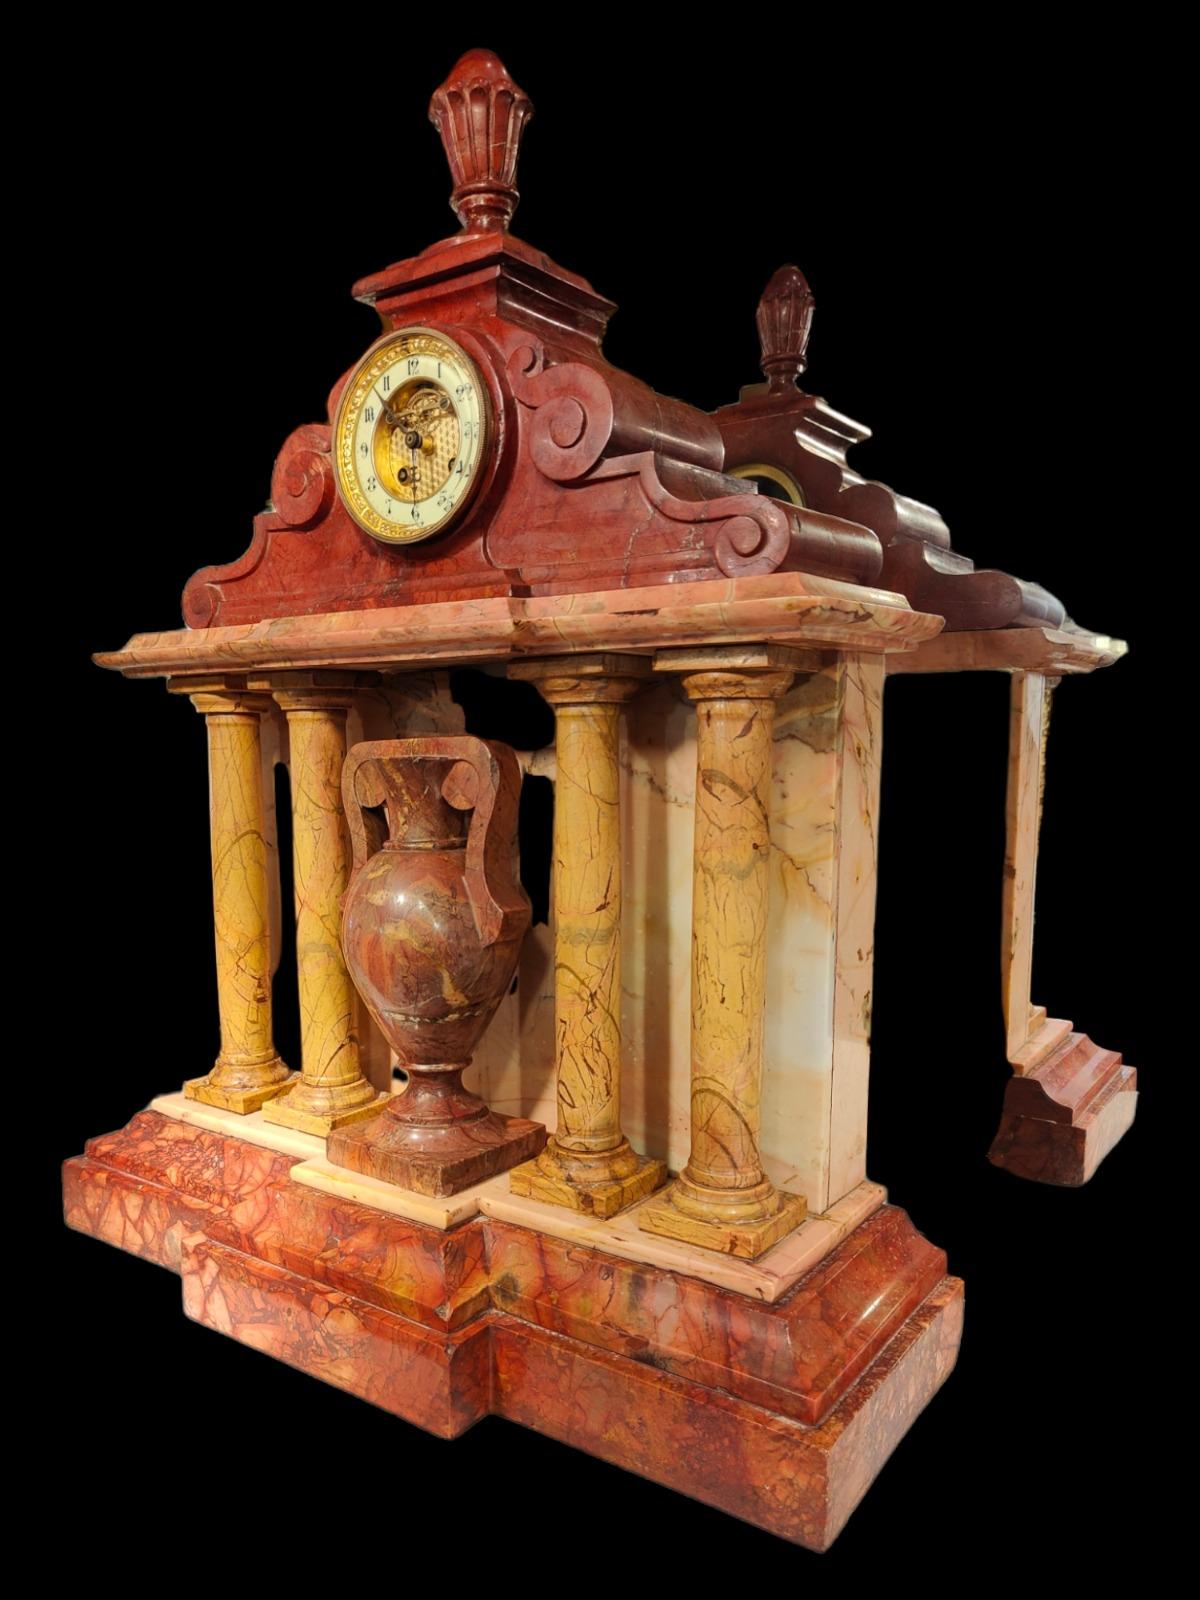 Great 19th century marble clock

Beautiful marble clock from the 19th century french. It is in very good condition with some unimportant faults. The clock works perfectly-it has an architectural shape and is possibly made to scale according to an